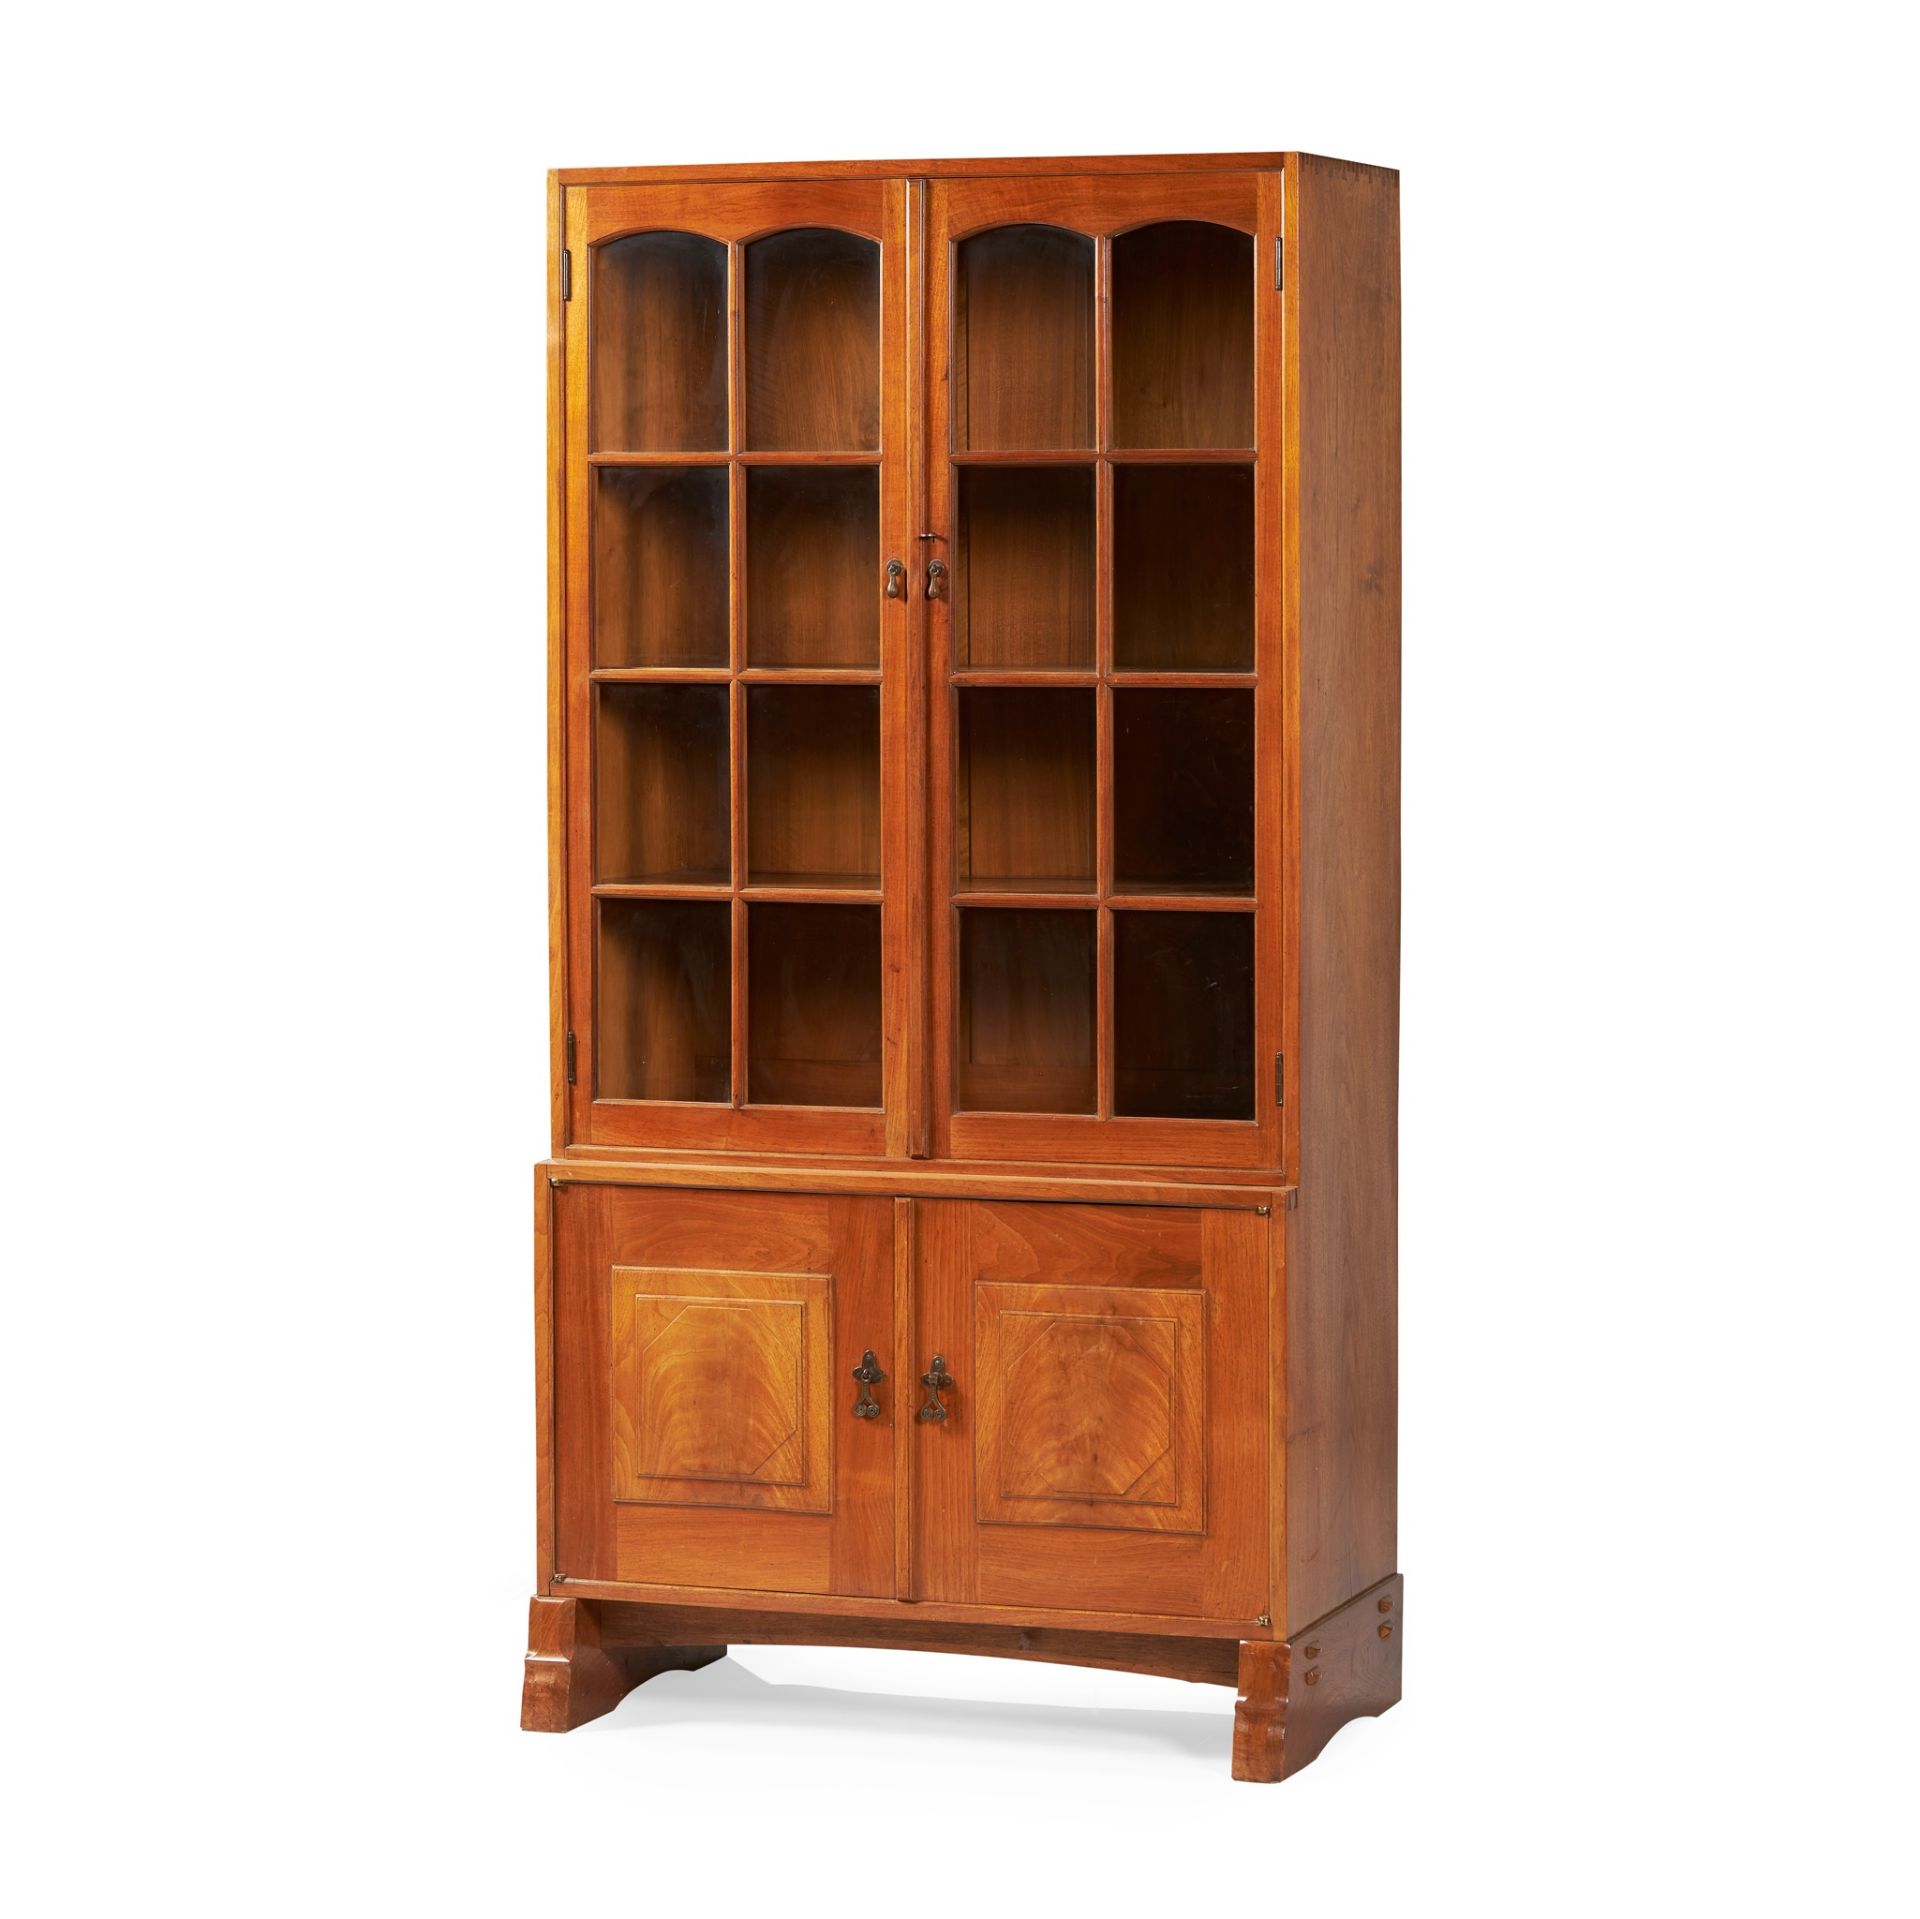 PETER WAALS (1870-1937) CABINET BOOKCASE, CIRCA 1929 - Image 2 of 7